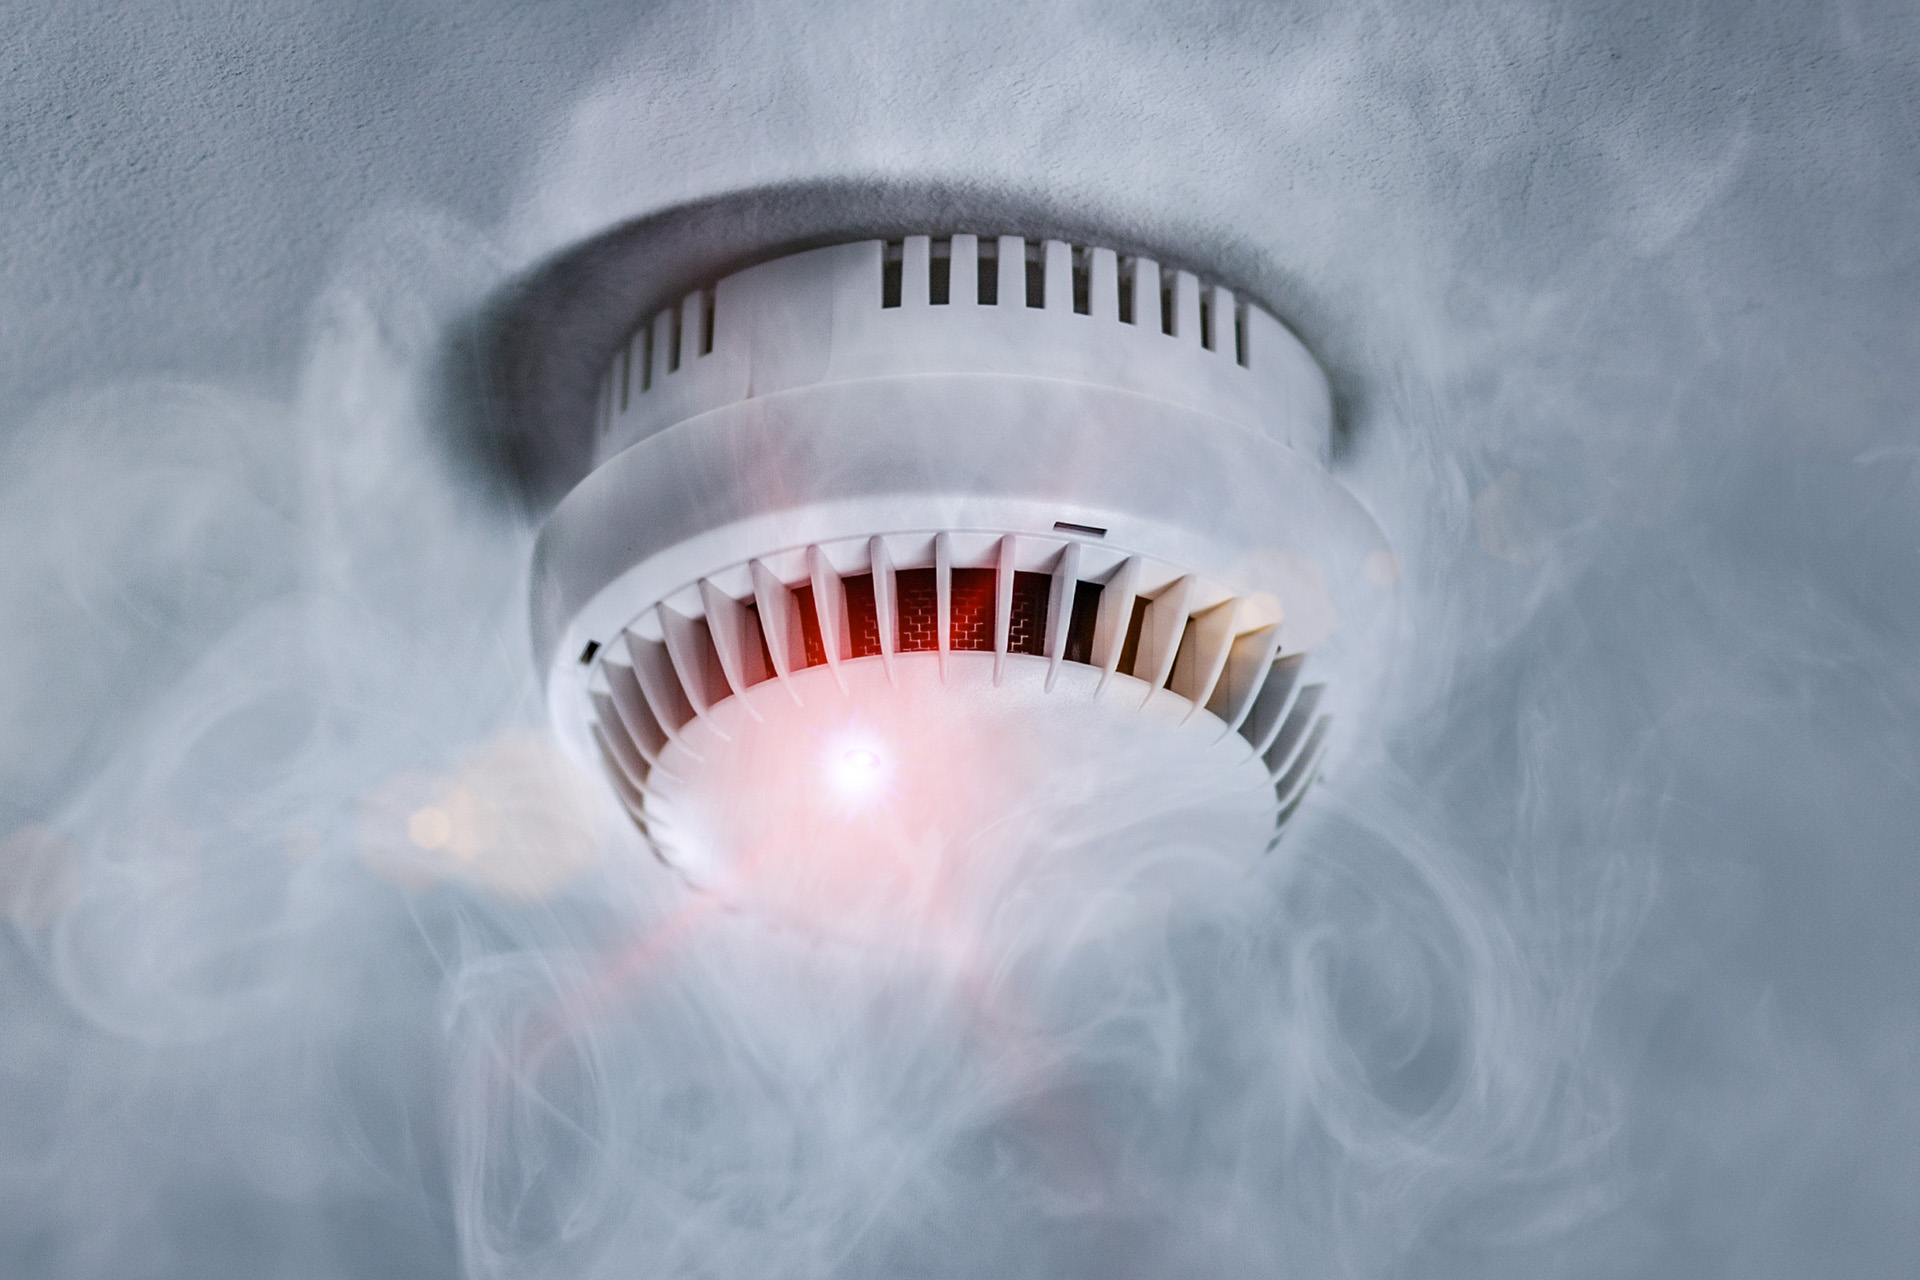 Smoke detector on ceiling surrounded by smoke